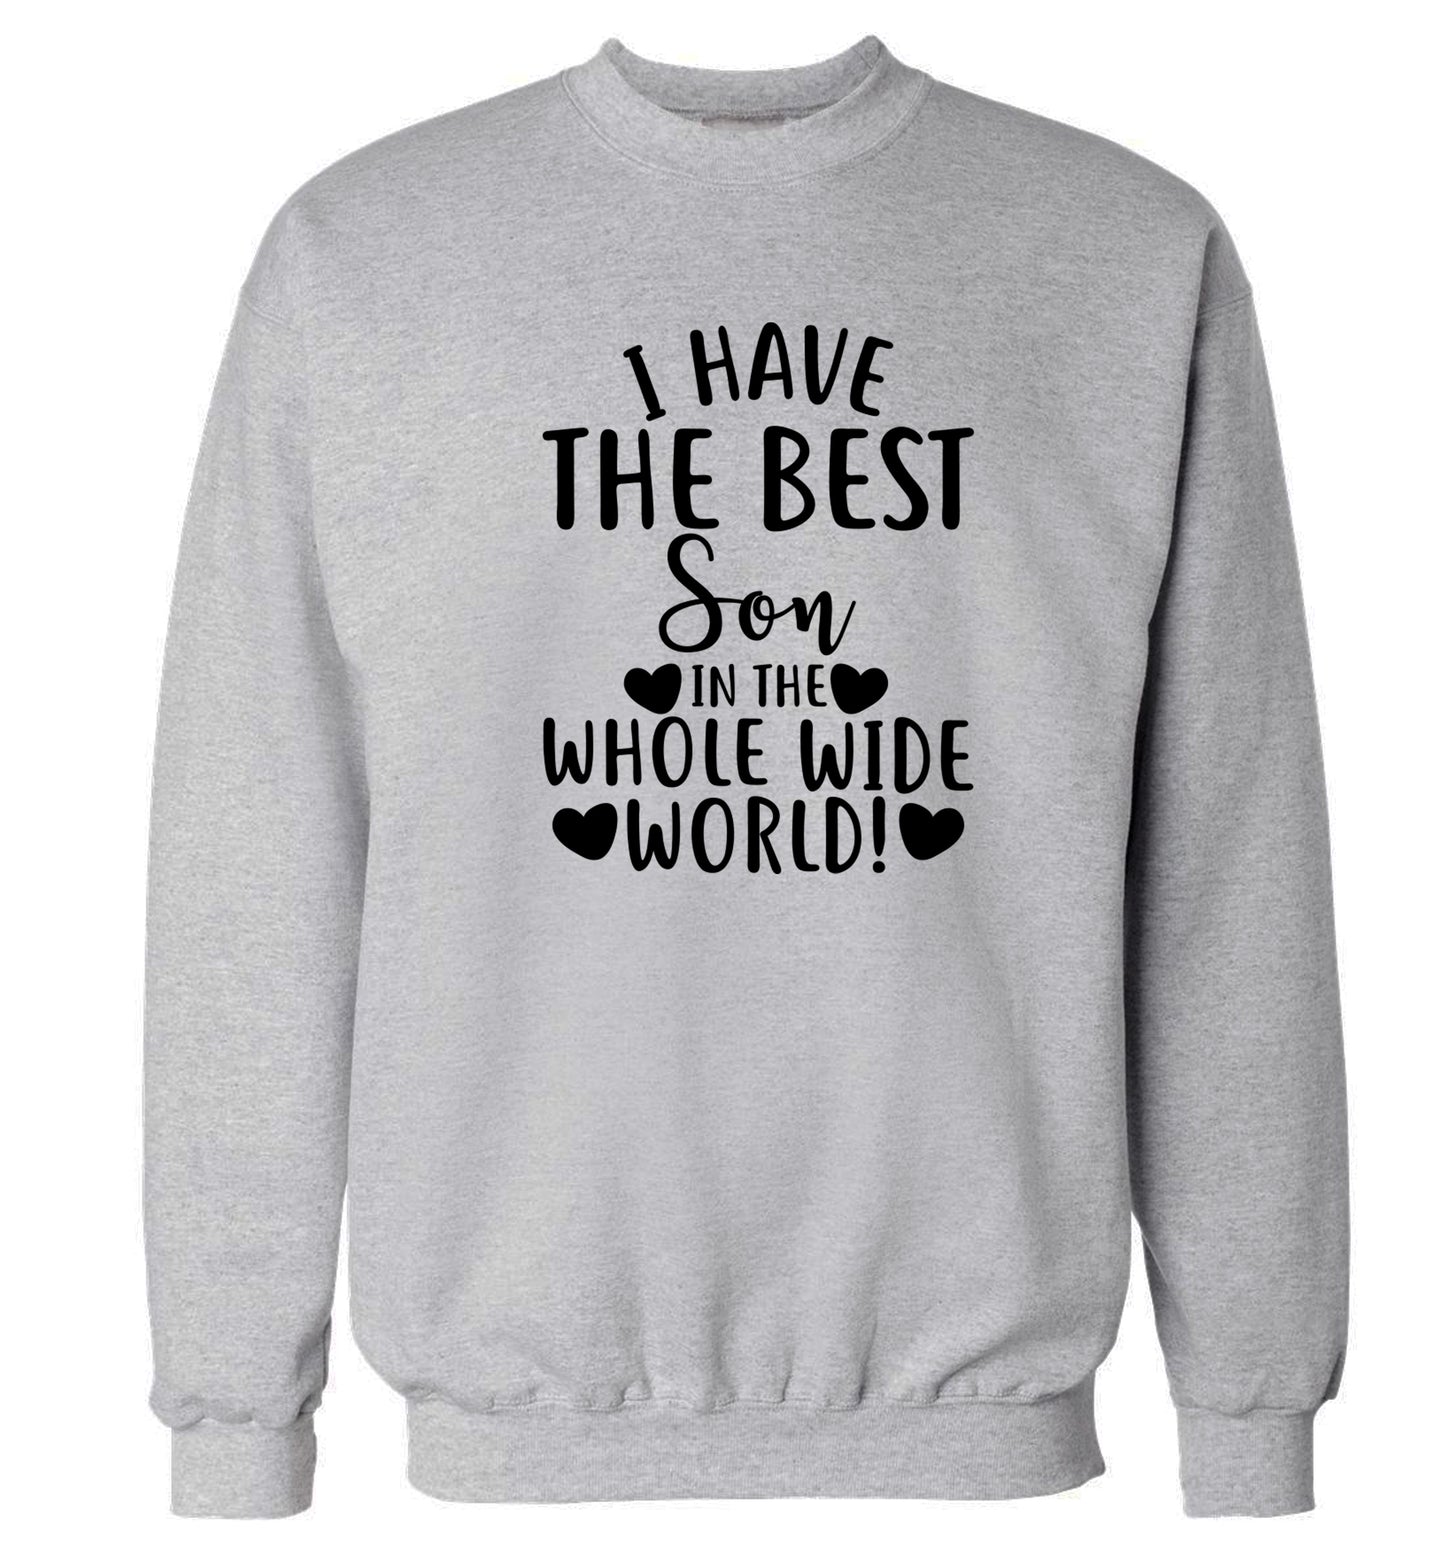 I have the best son in the whole wide world! Adult's unisex grey Sweater 2XL